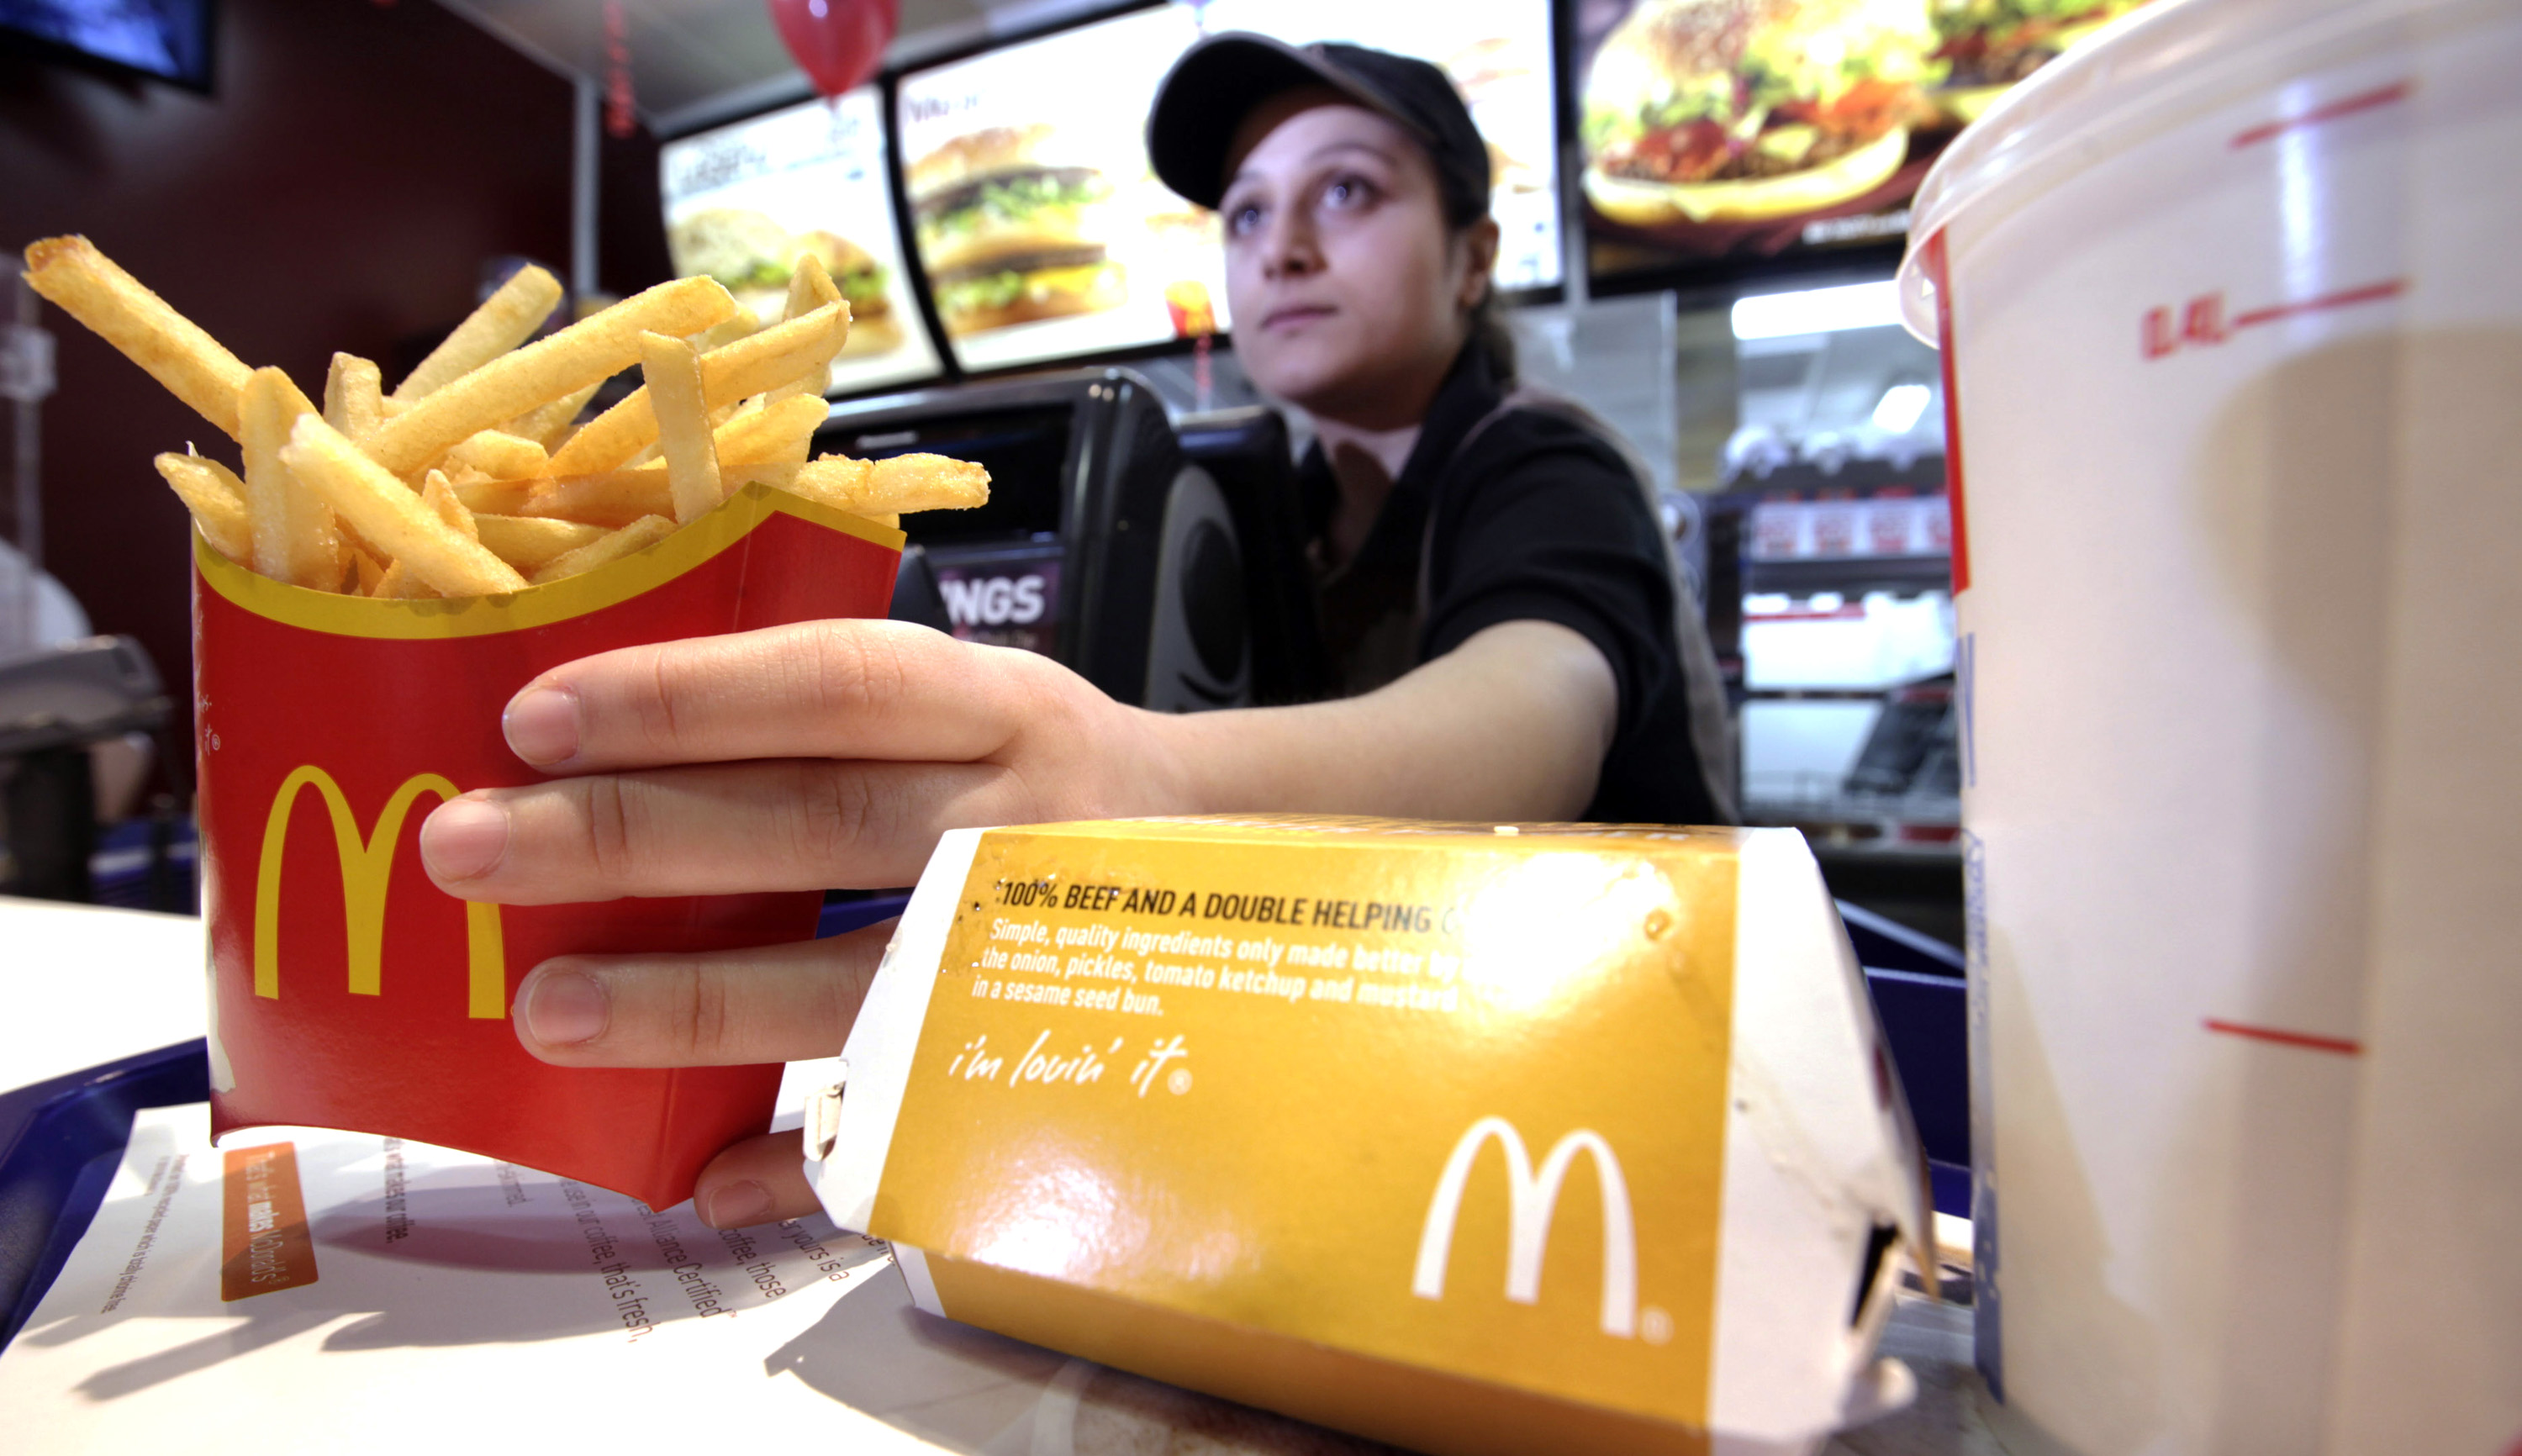 A McDonald's employee serves a burger and a carton of french fries at one of the company's restaurants.